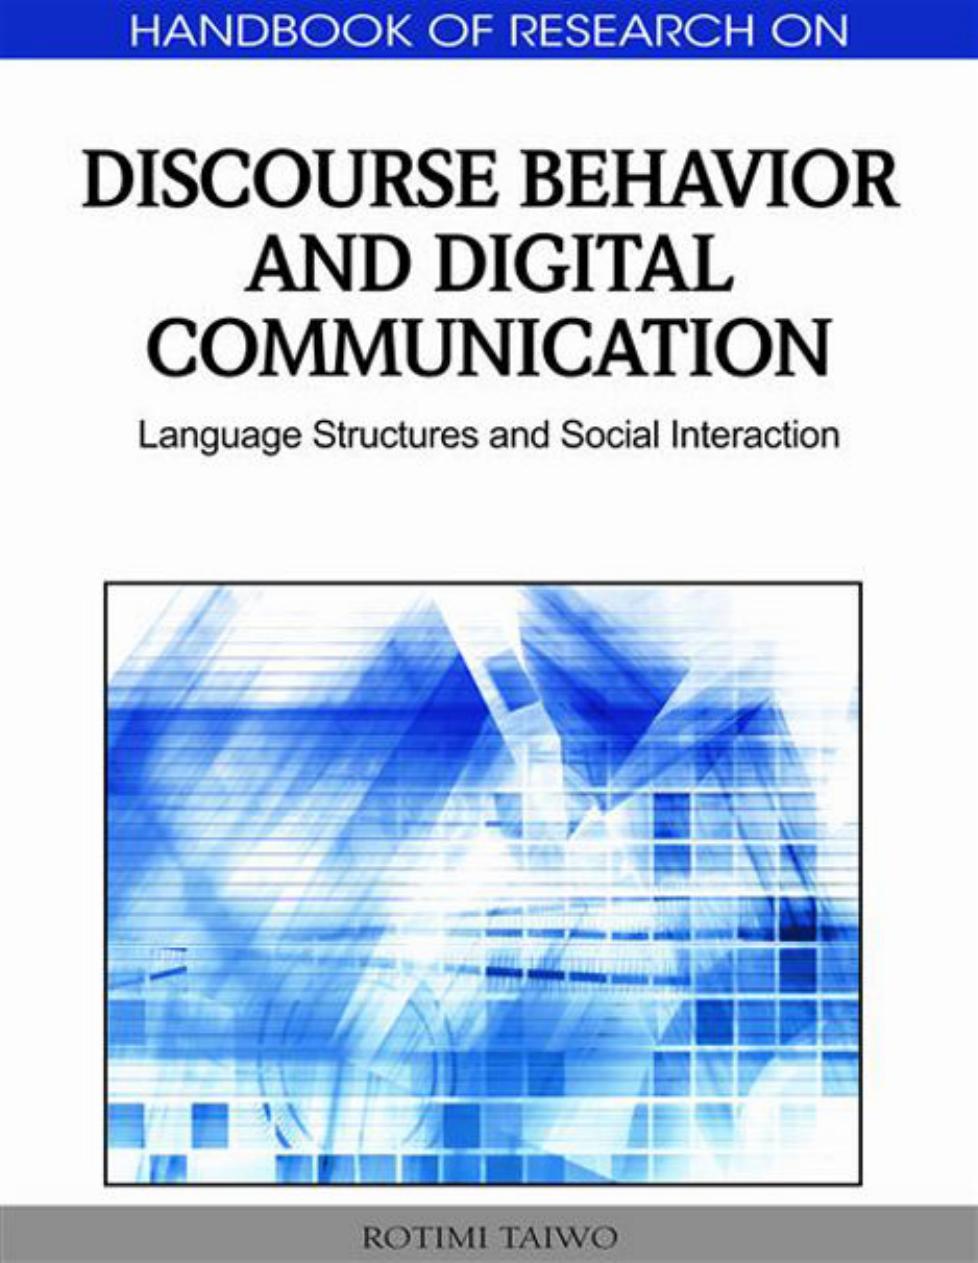 Handbook of Research on Discourse Behavior and Digital Communication